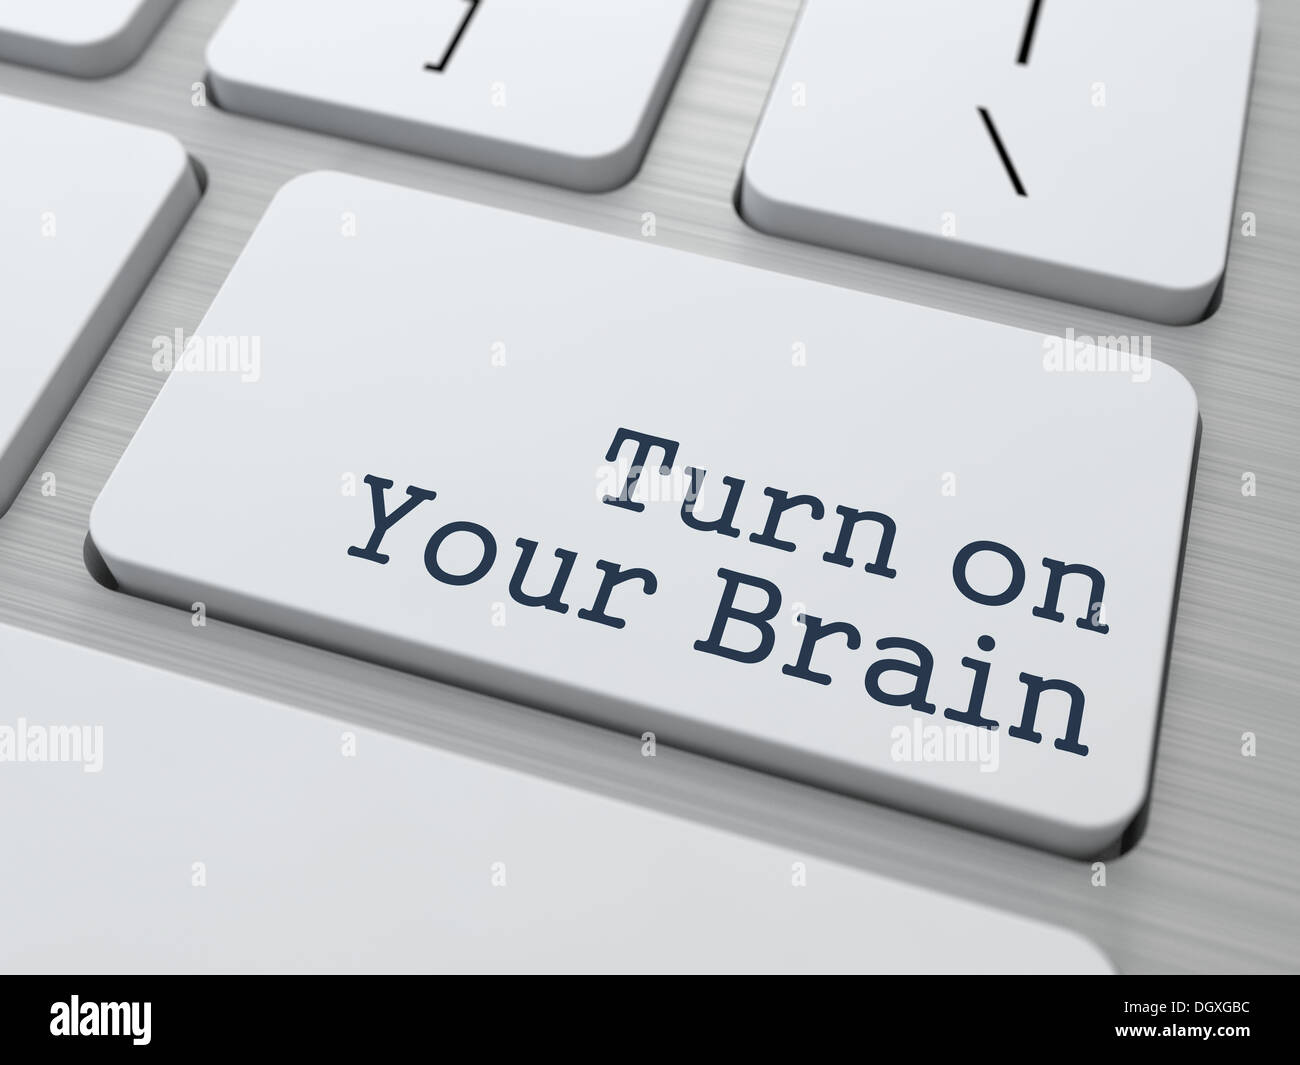 Turn On Your Brain. Motivation Concept. Stock Photo